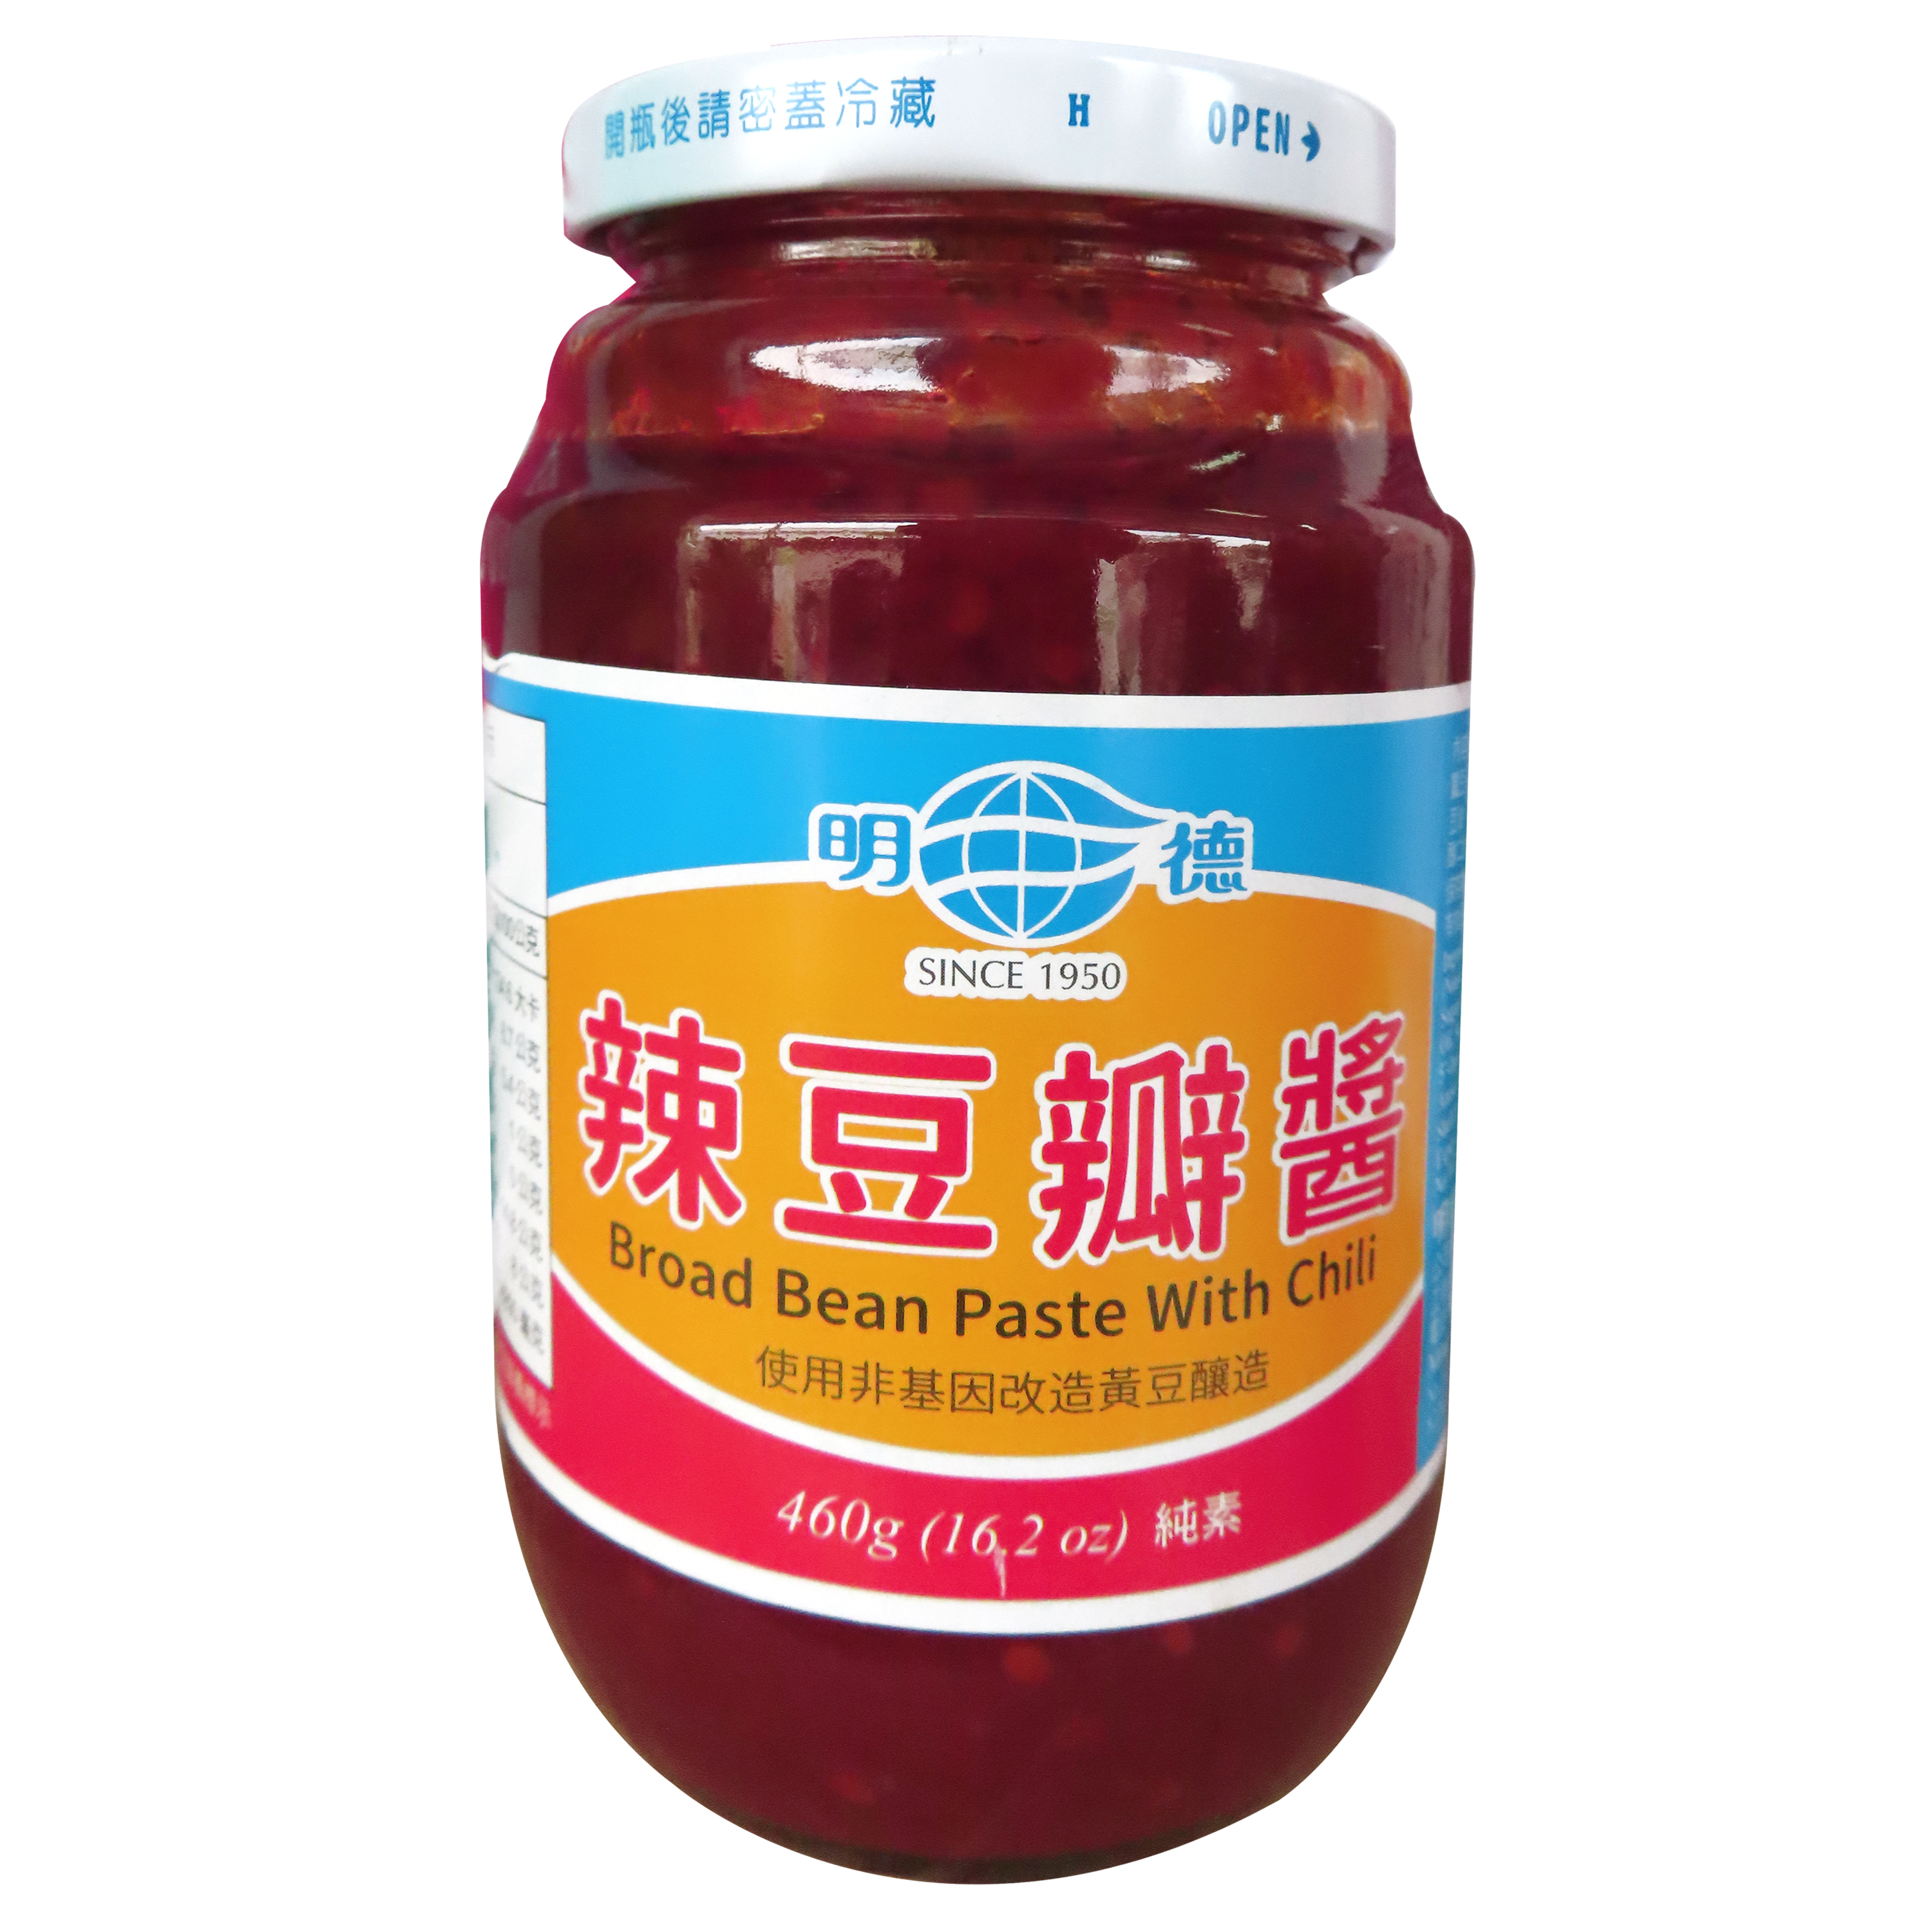 Image Broad Bean Paste with Chilli 明德 - 辣豆瓣酱 460grams